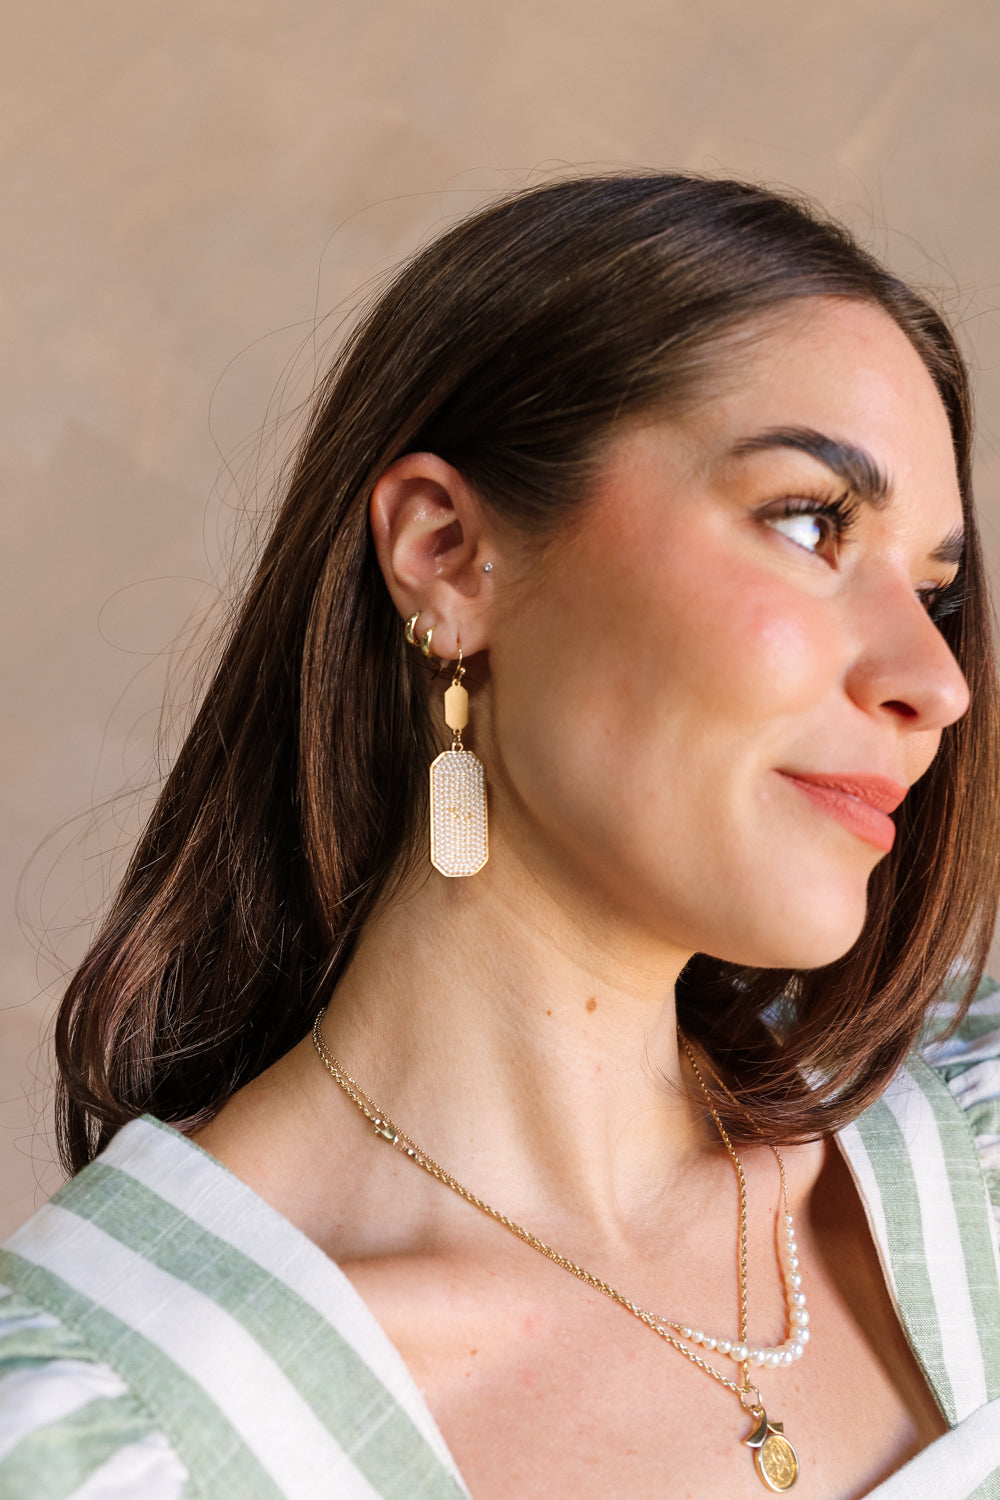 Side of female model's face; model is wearing the Addison Gold & Pearl Dangle Earrings that have a gold hexagon shape attached to gold hooks, with a gold hexagonal dangle with pearls on top.